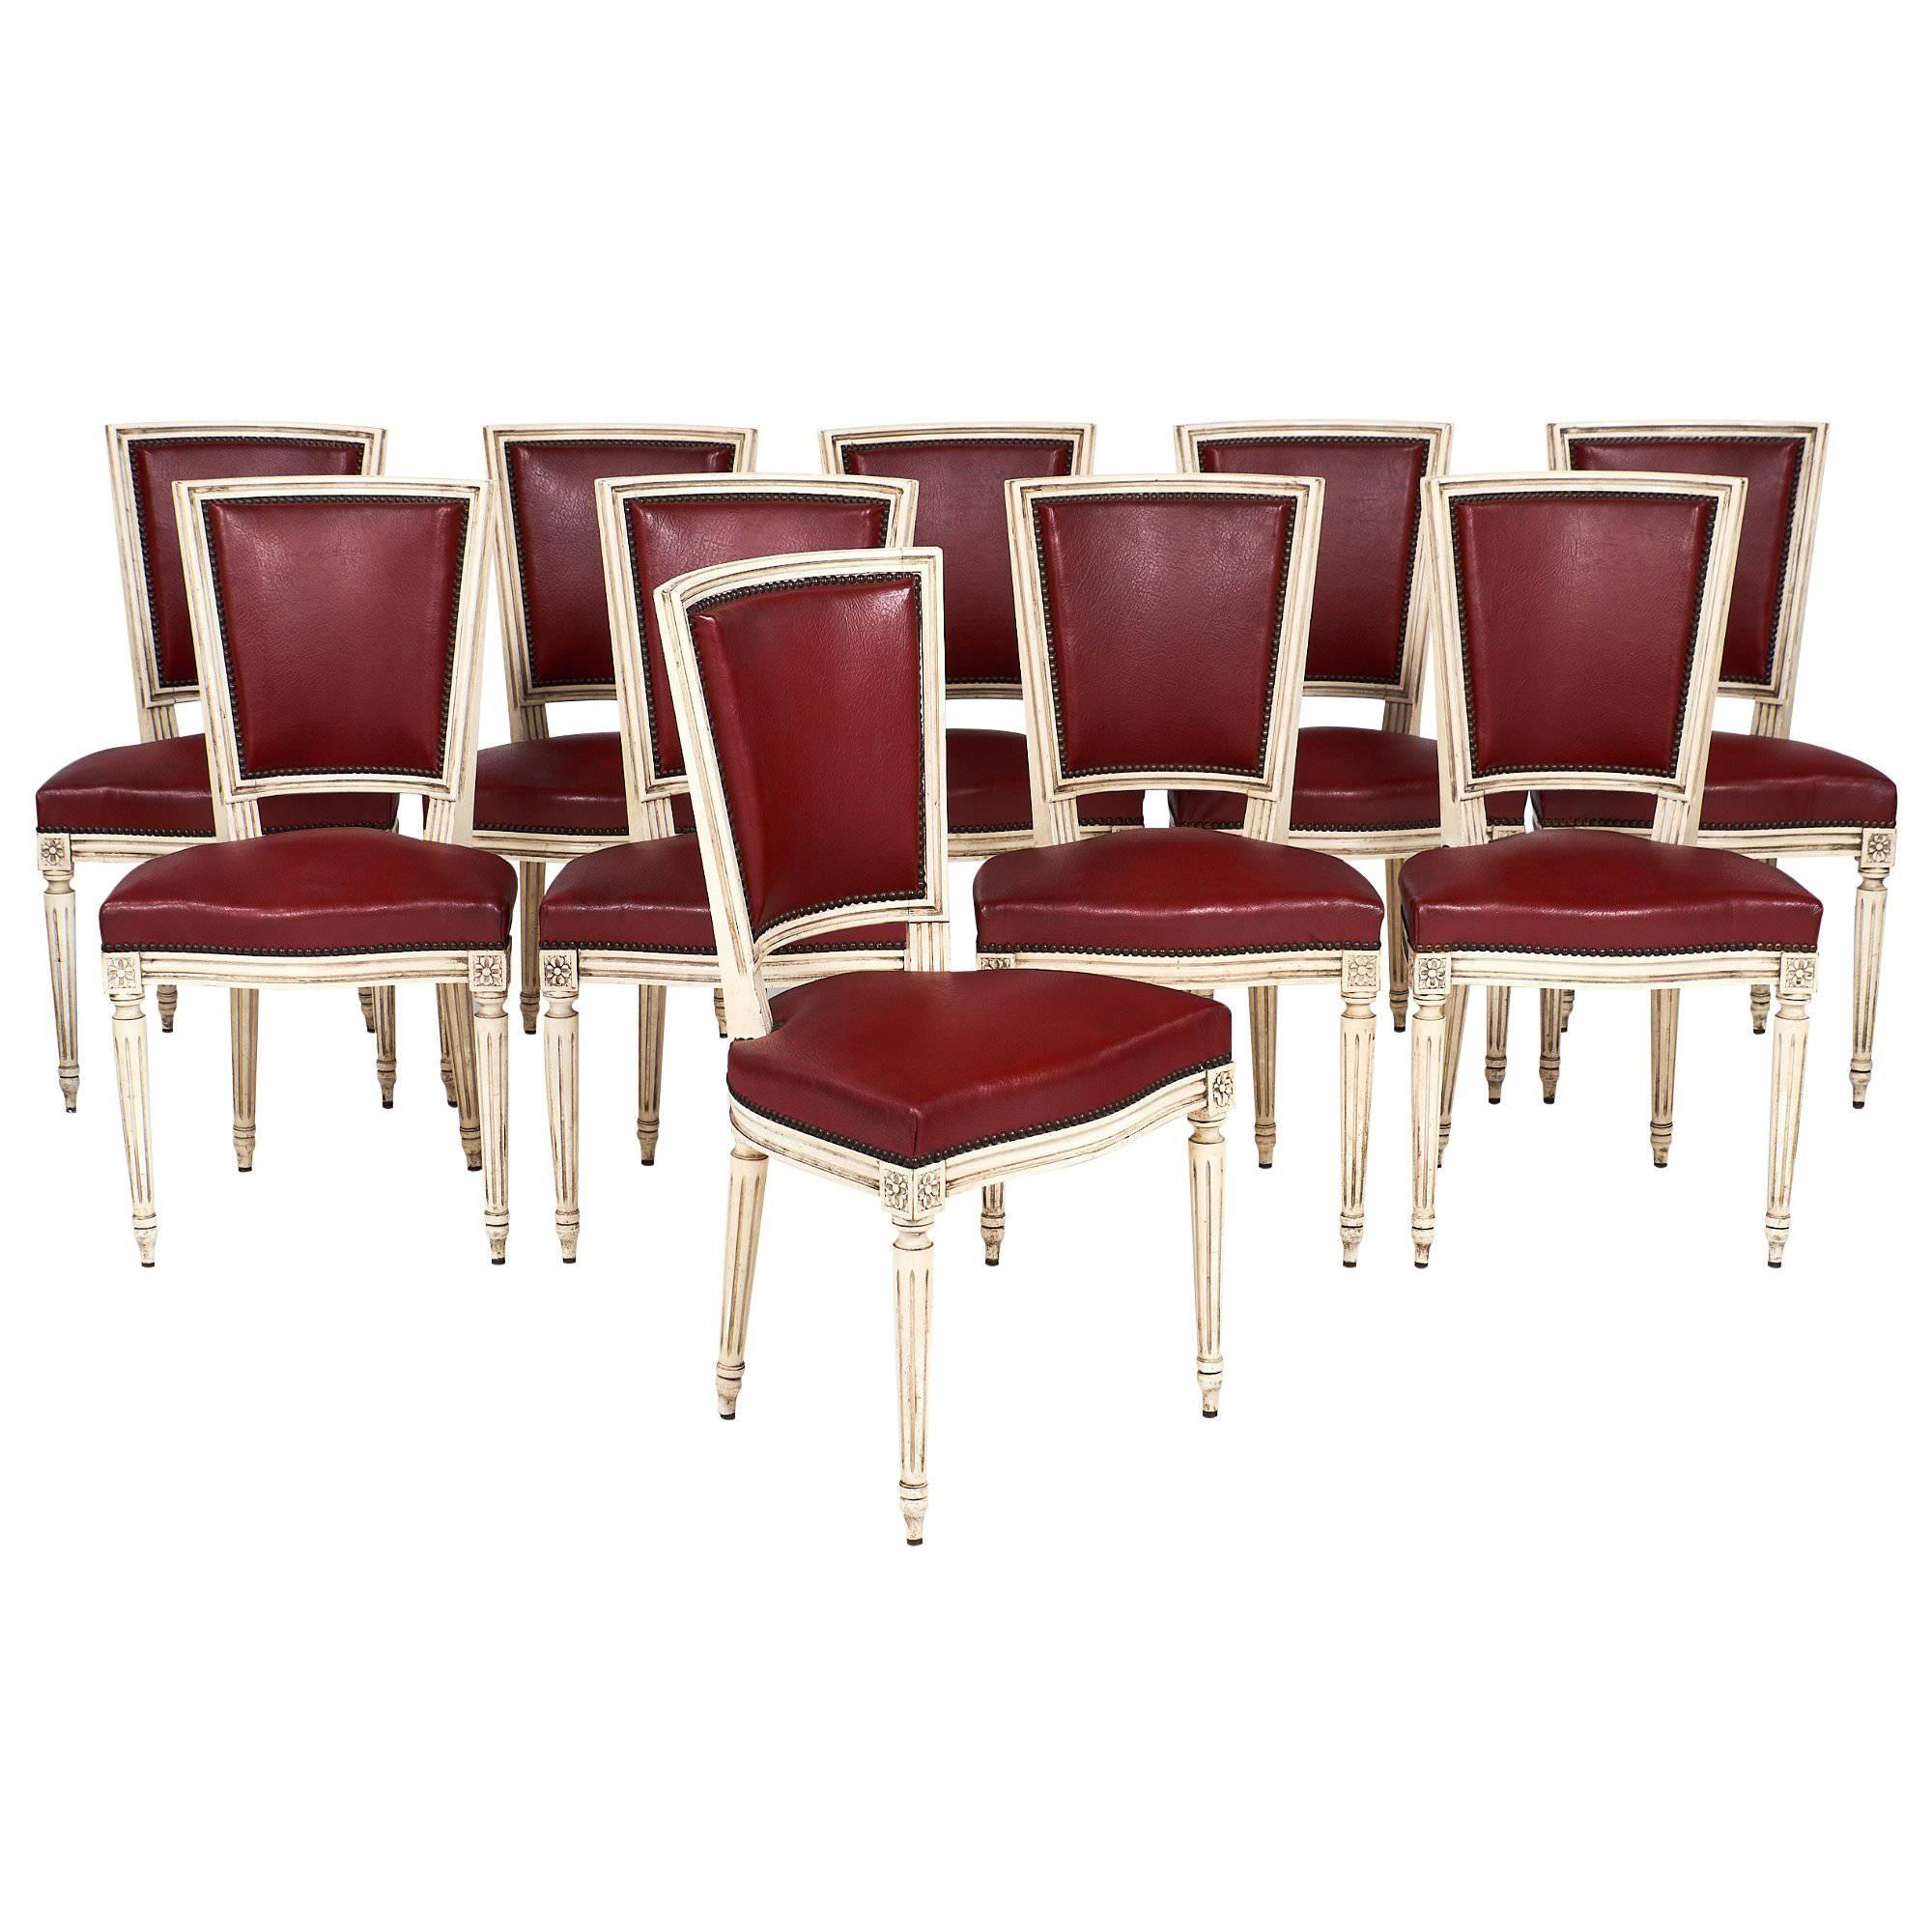 Ten Louis XVI Style Red Dining Chairs